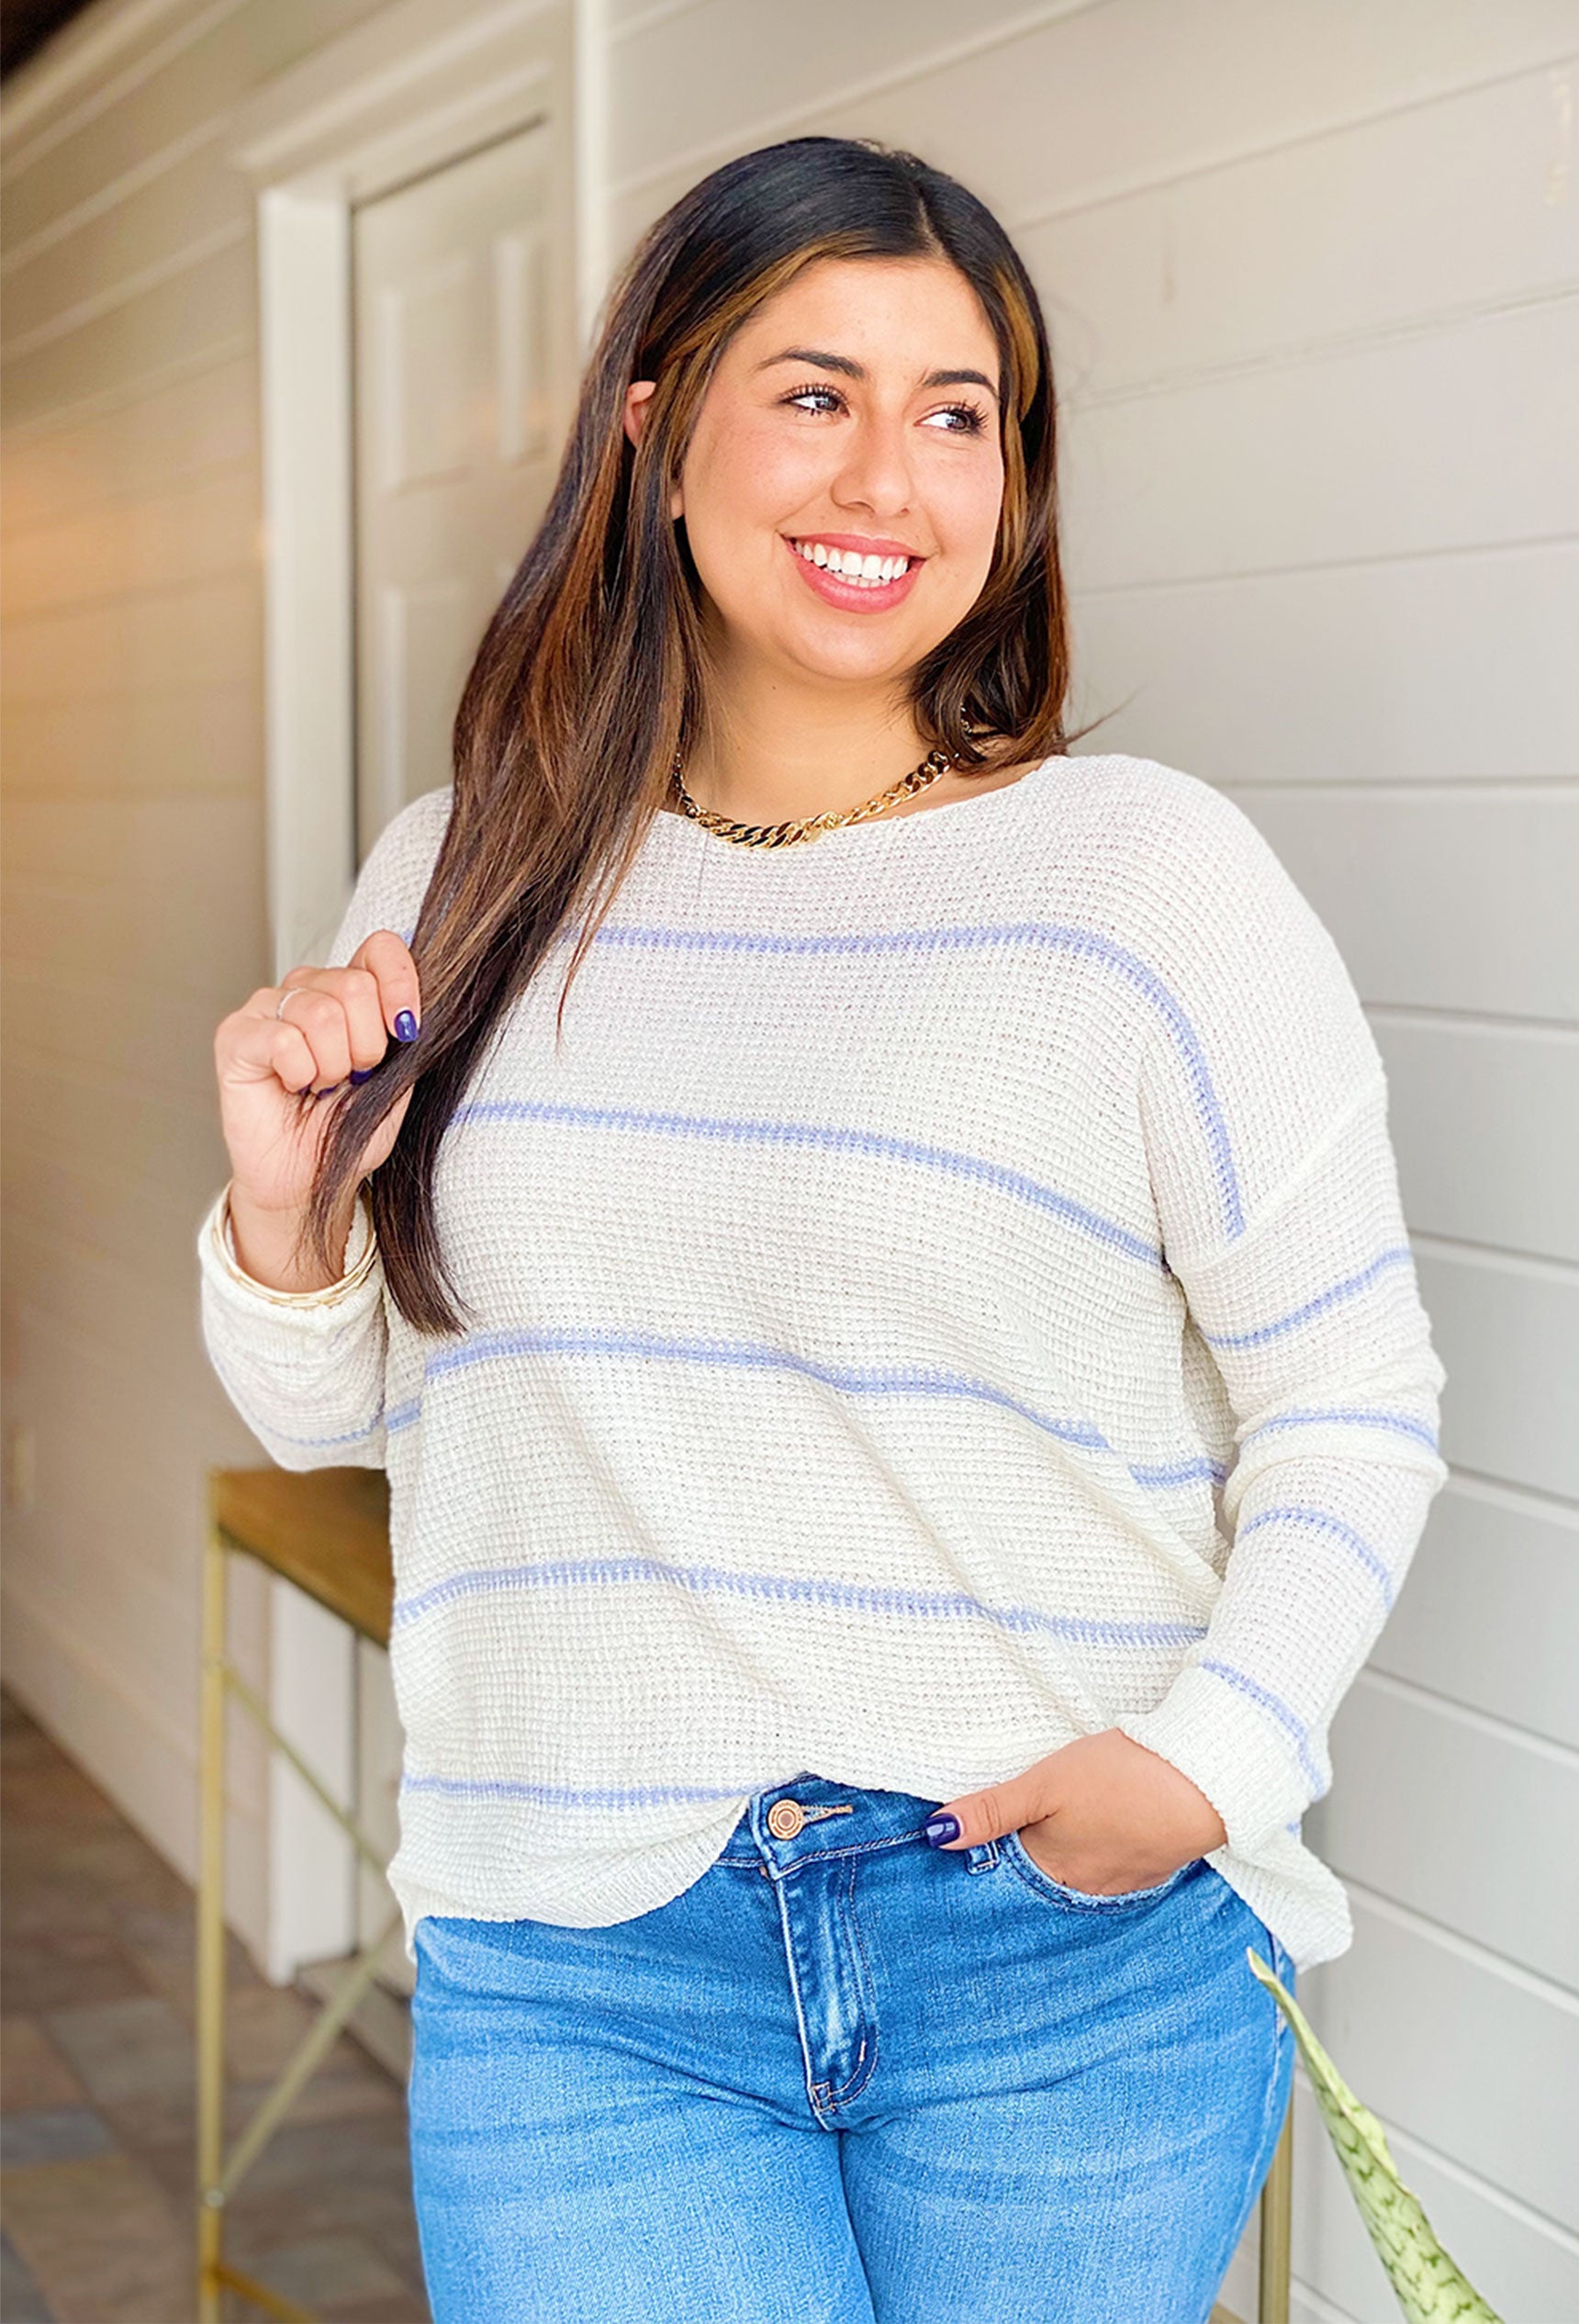 Nights in Aspen Striped Sweater, white knit sweater with blue stripes 